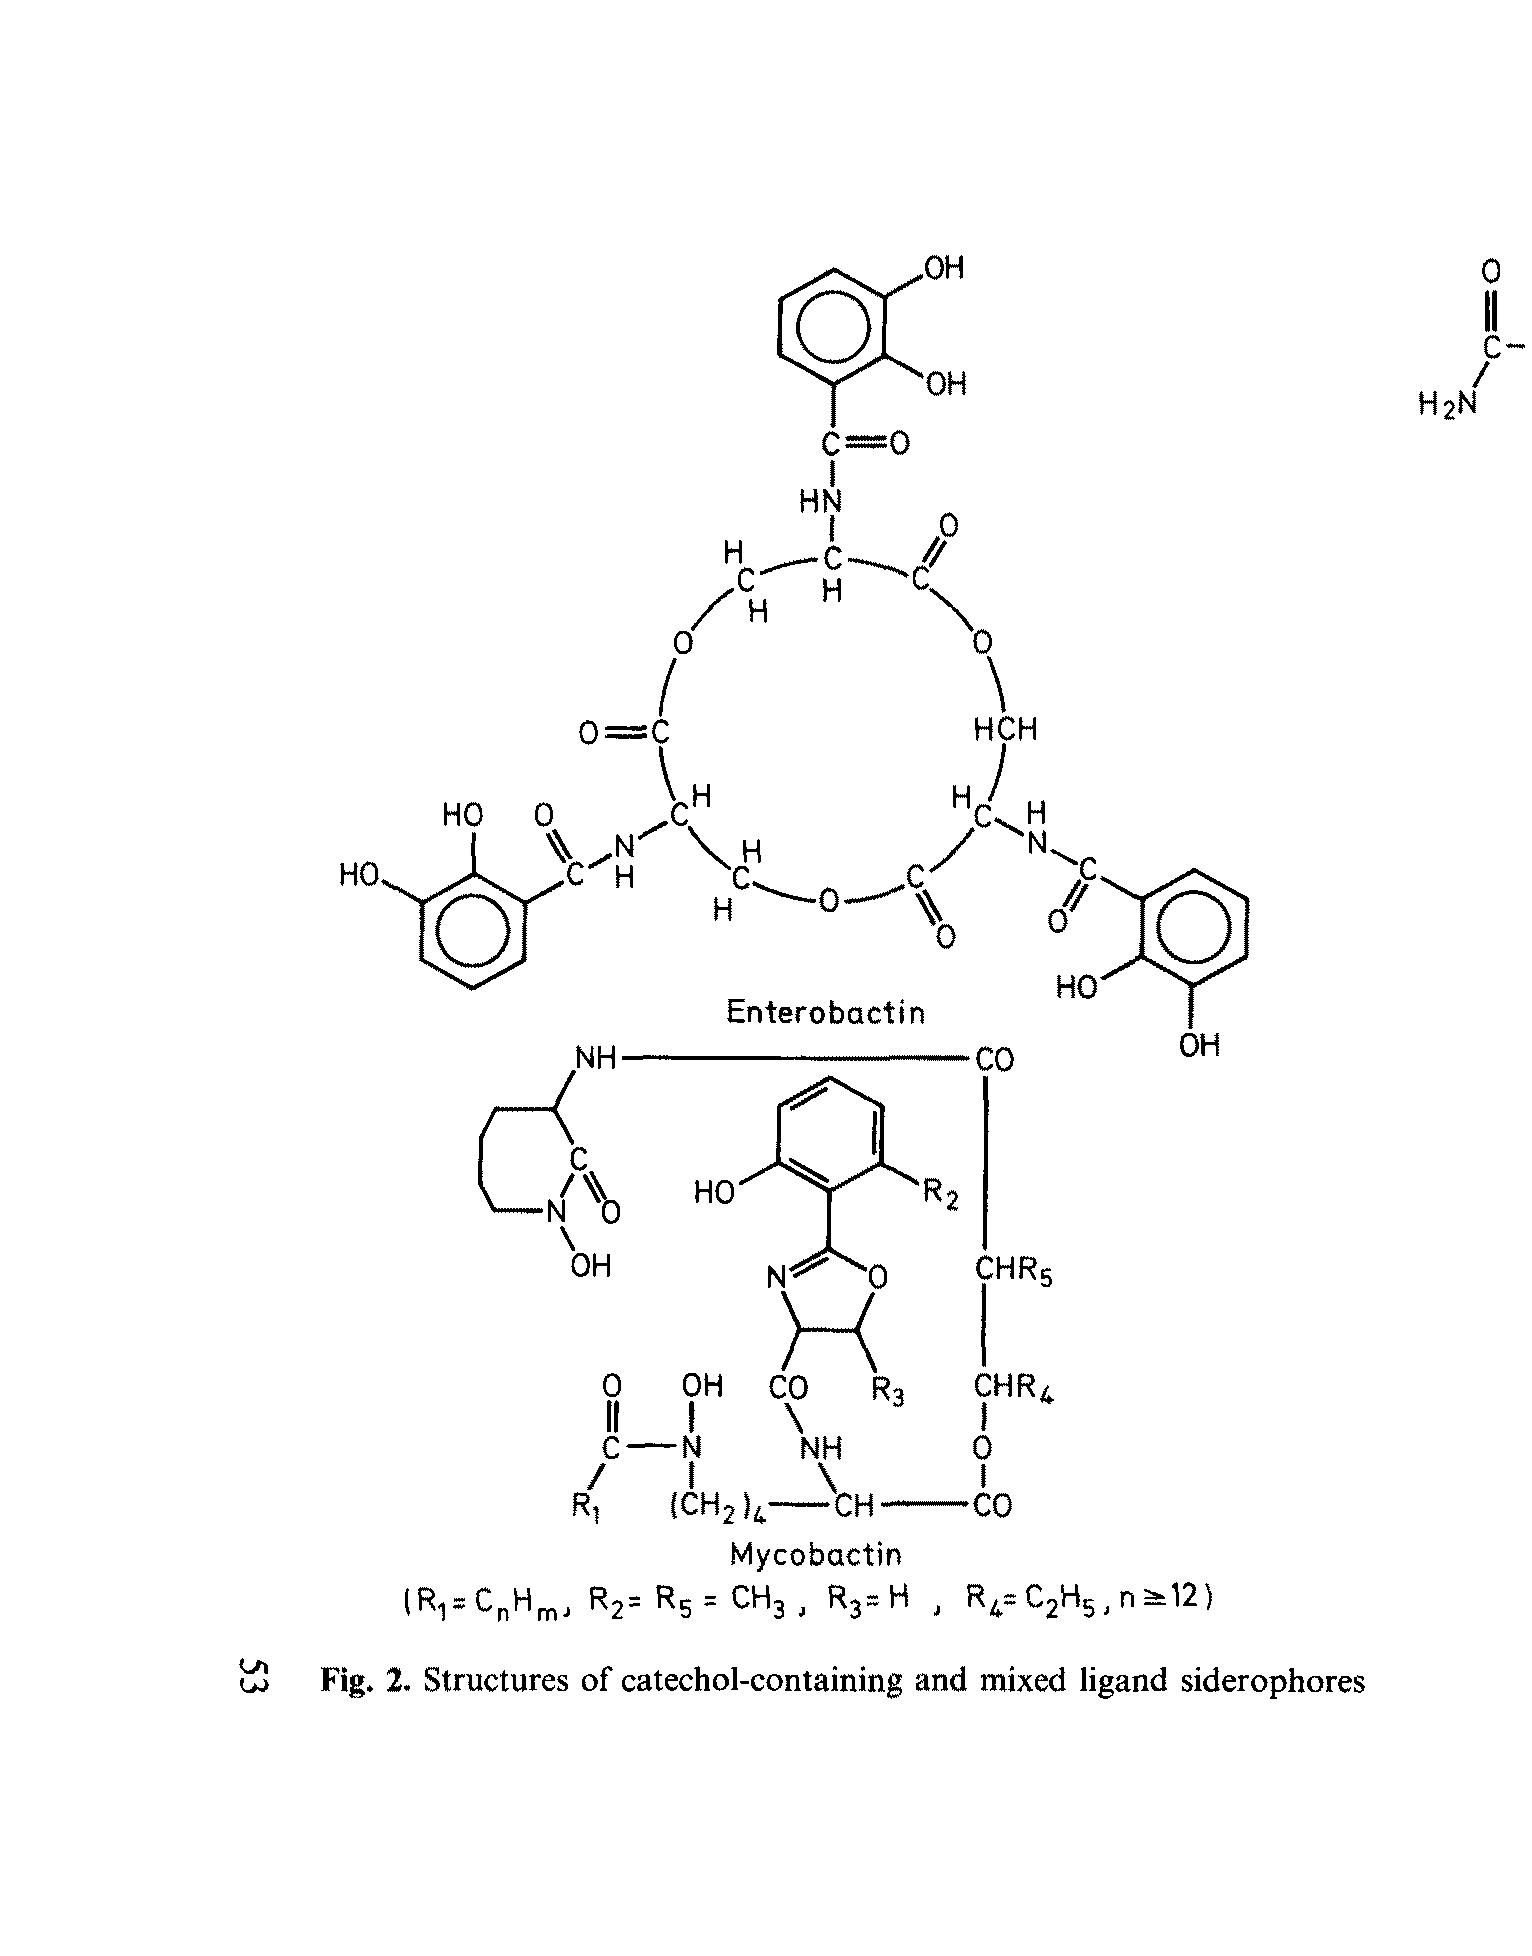 Fig. 2. Structures of catechol-containing and mixed ligand siderophores...